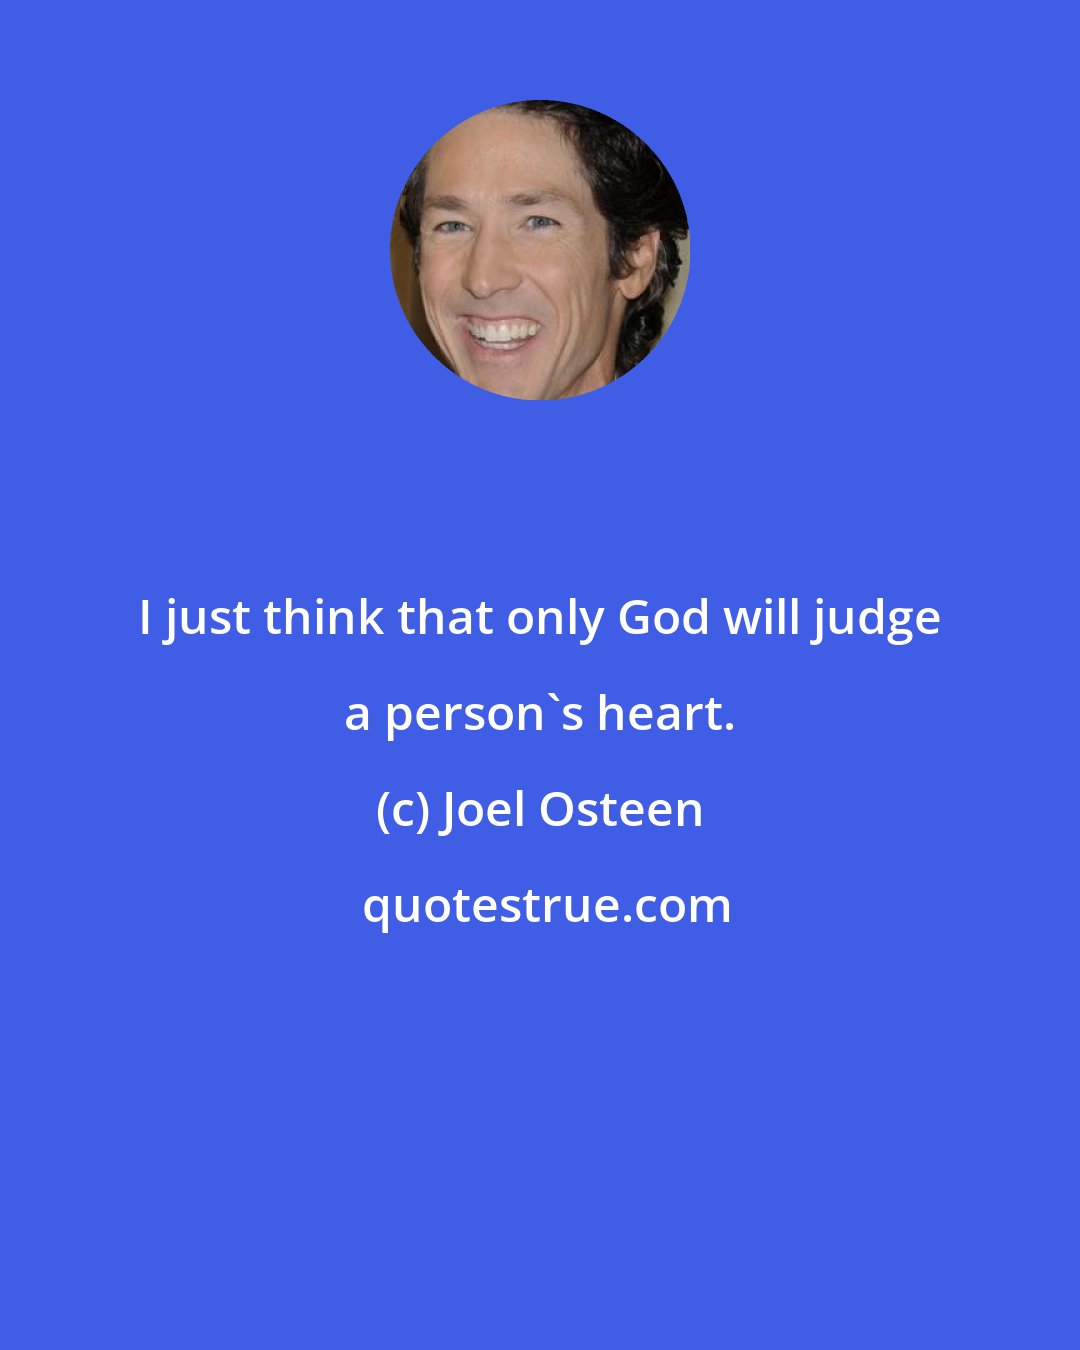 Joel Osteen: I just think that only God will judge a person's heart.